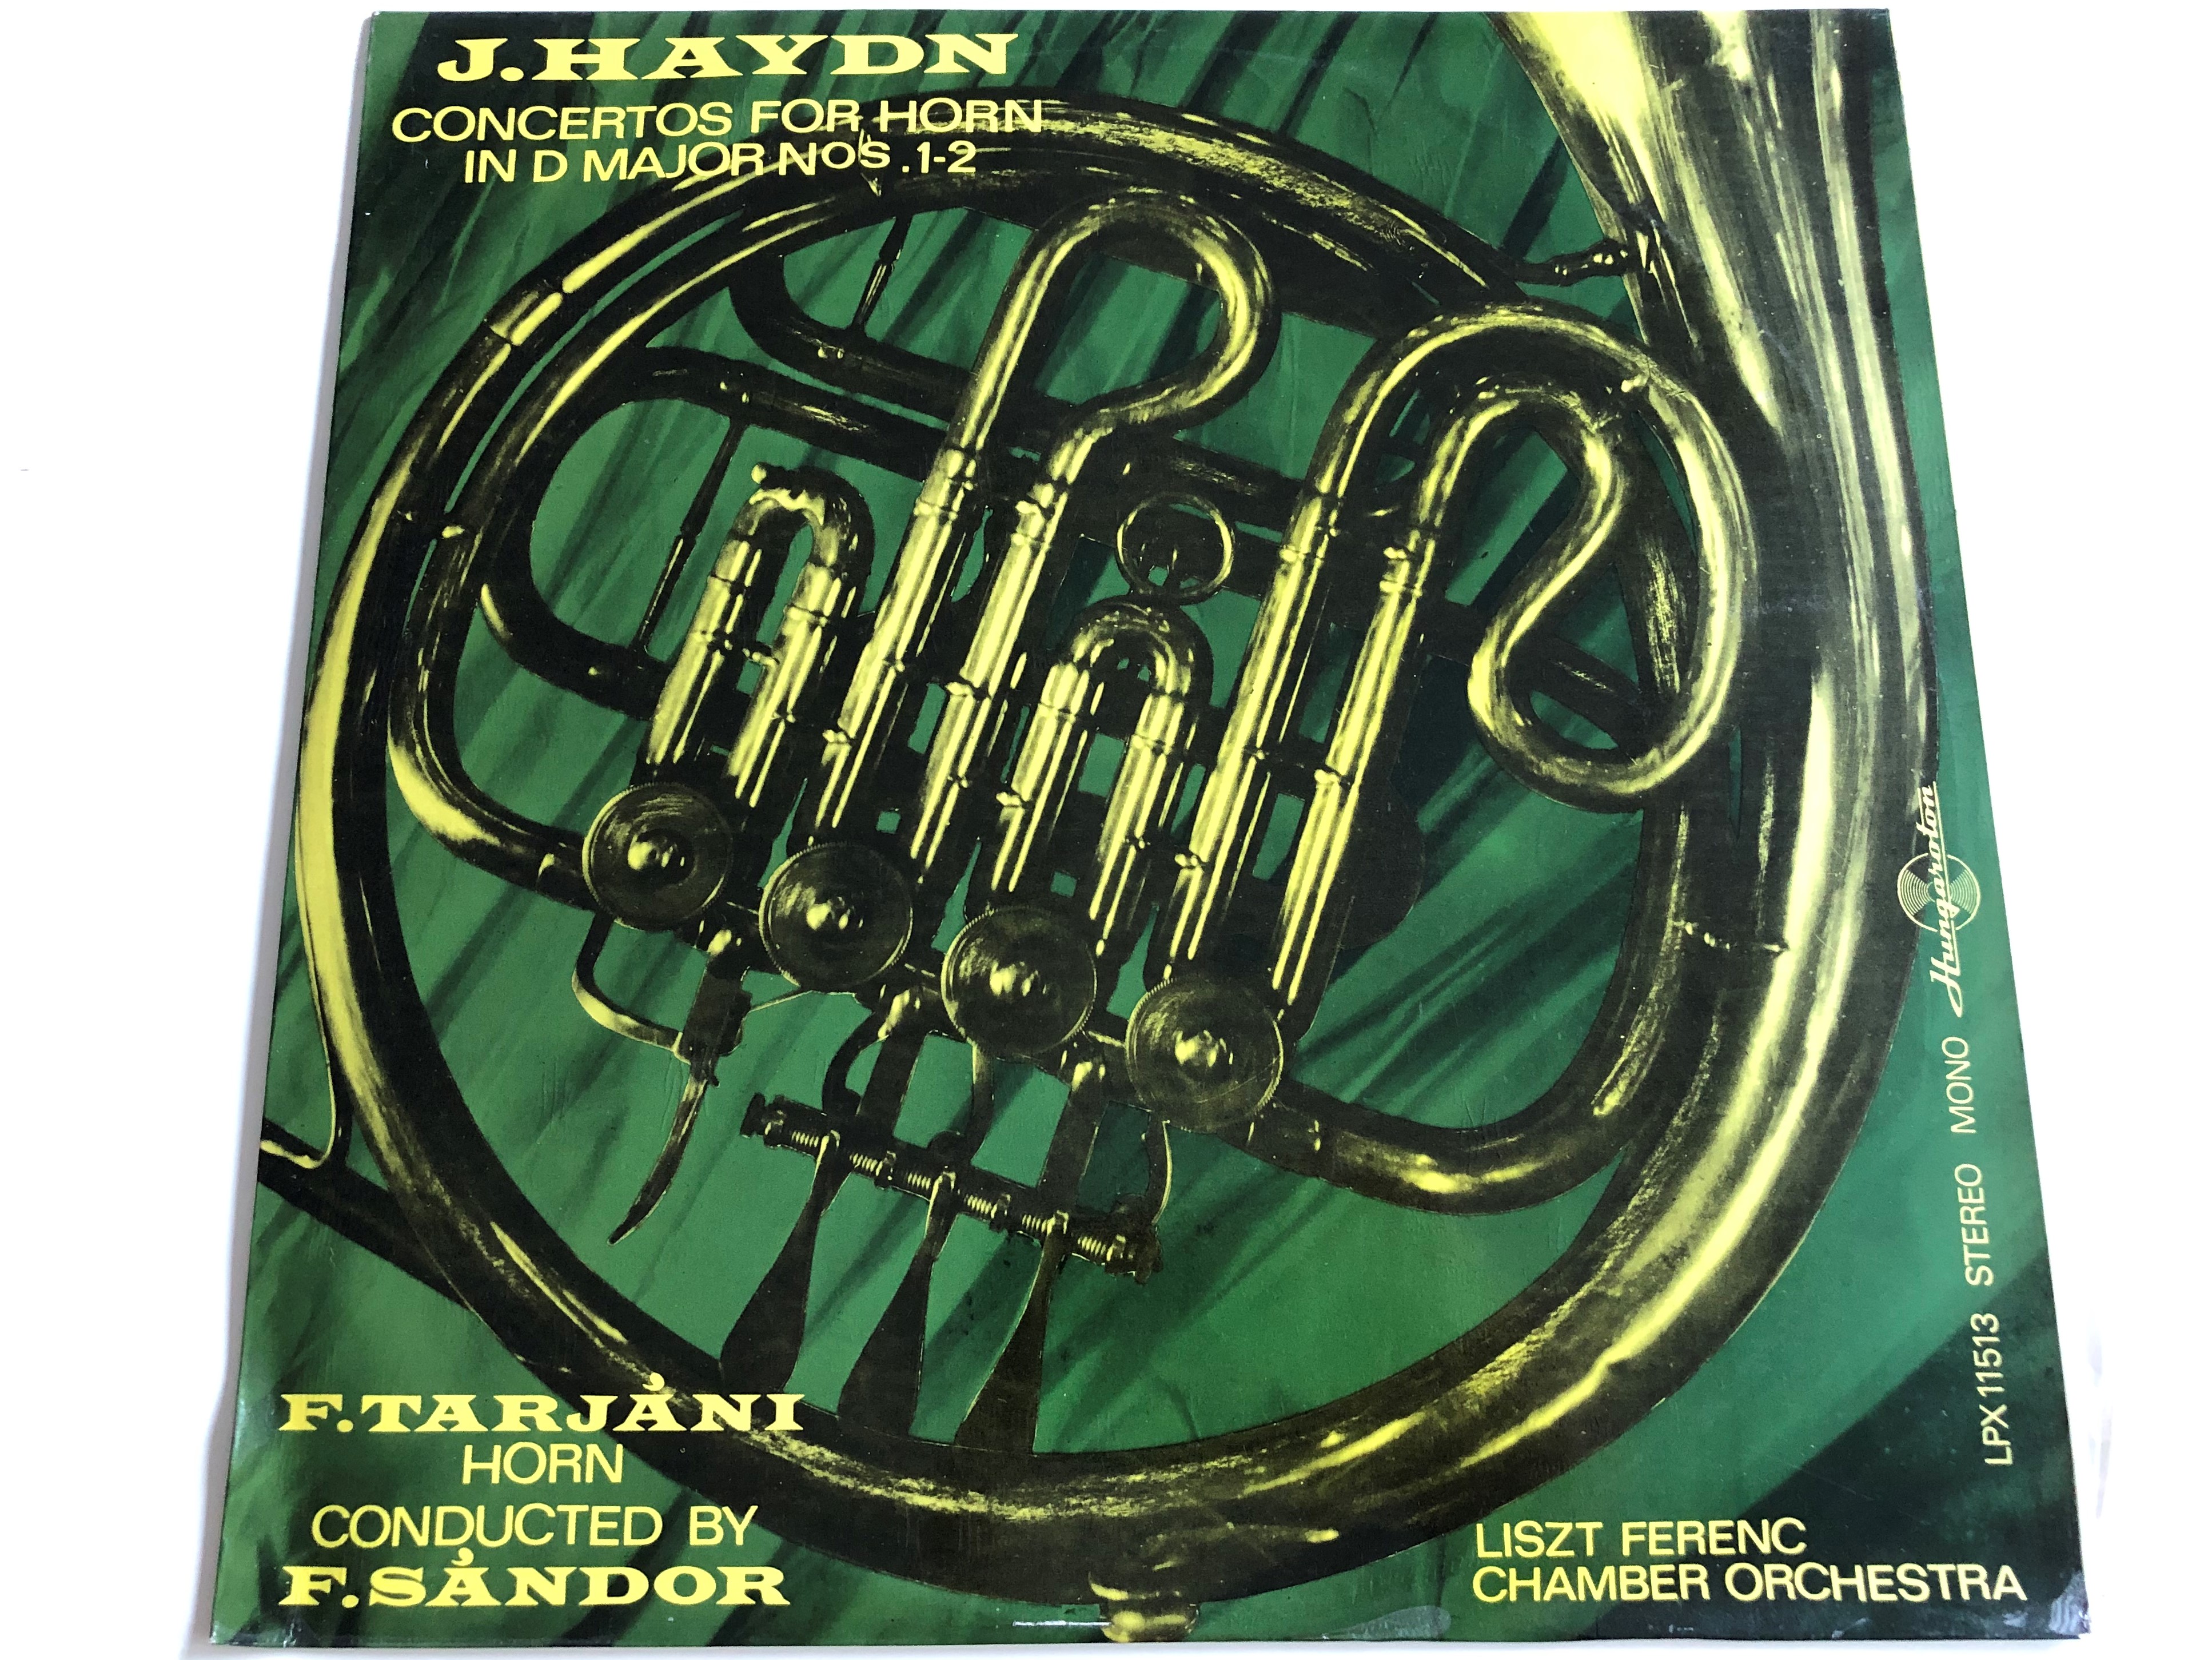 j.haydn-concertos-for-horn-in-d-major-nos.-1-2-f.-tarj-ni-conducted-f.-s-ndor-liszt-ferenc-chamber-orchestra-hungaroton-lp-stereo-mono-lpx-11513-1-.jpg